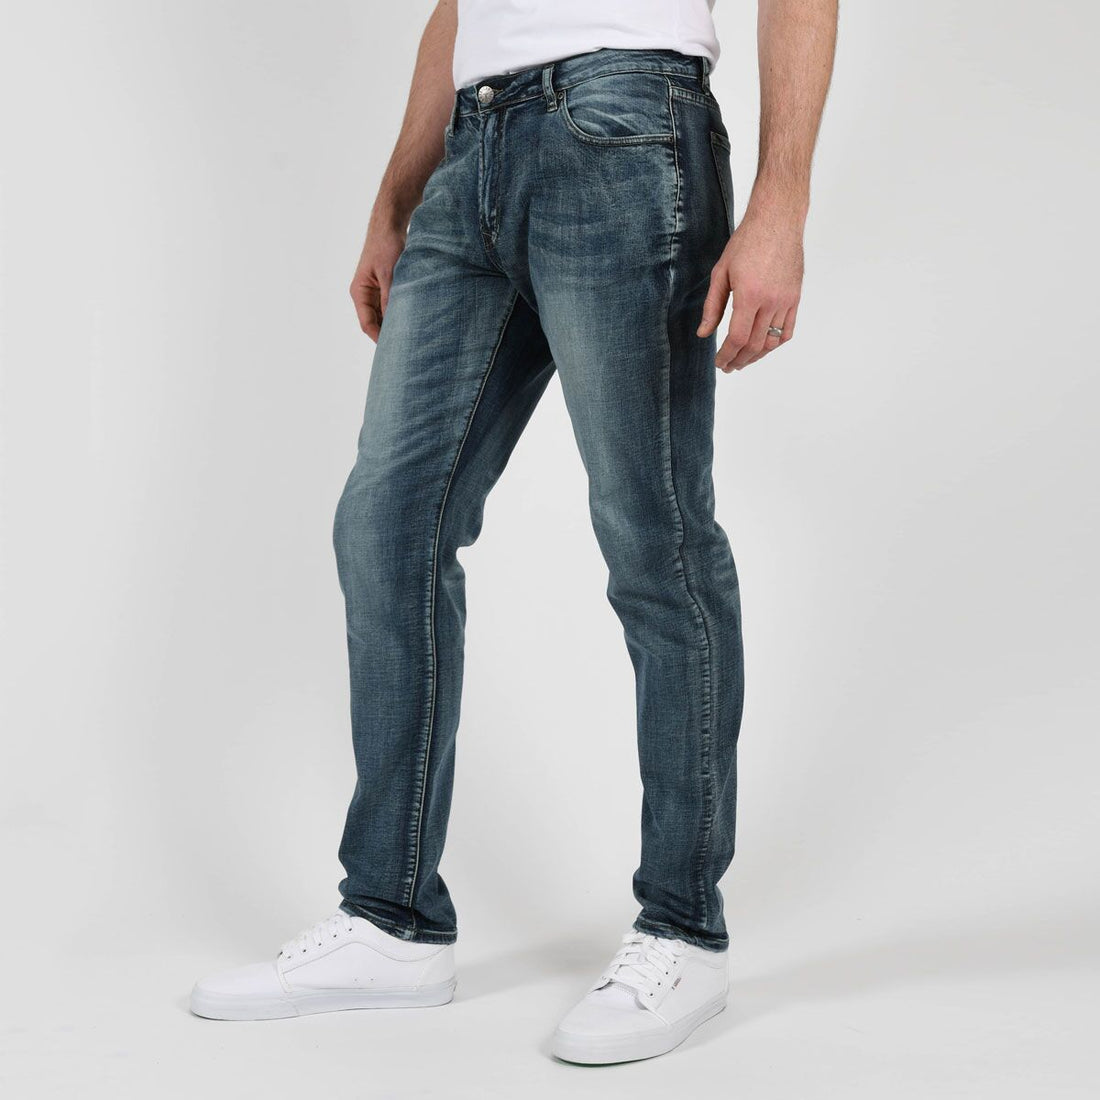 Tall Men’s Fashion? It’s in Our Jeans